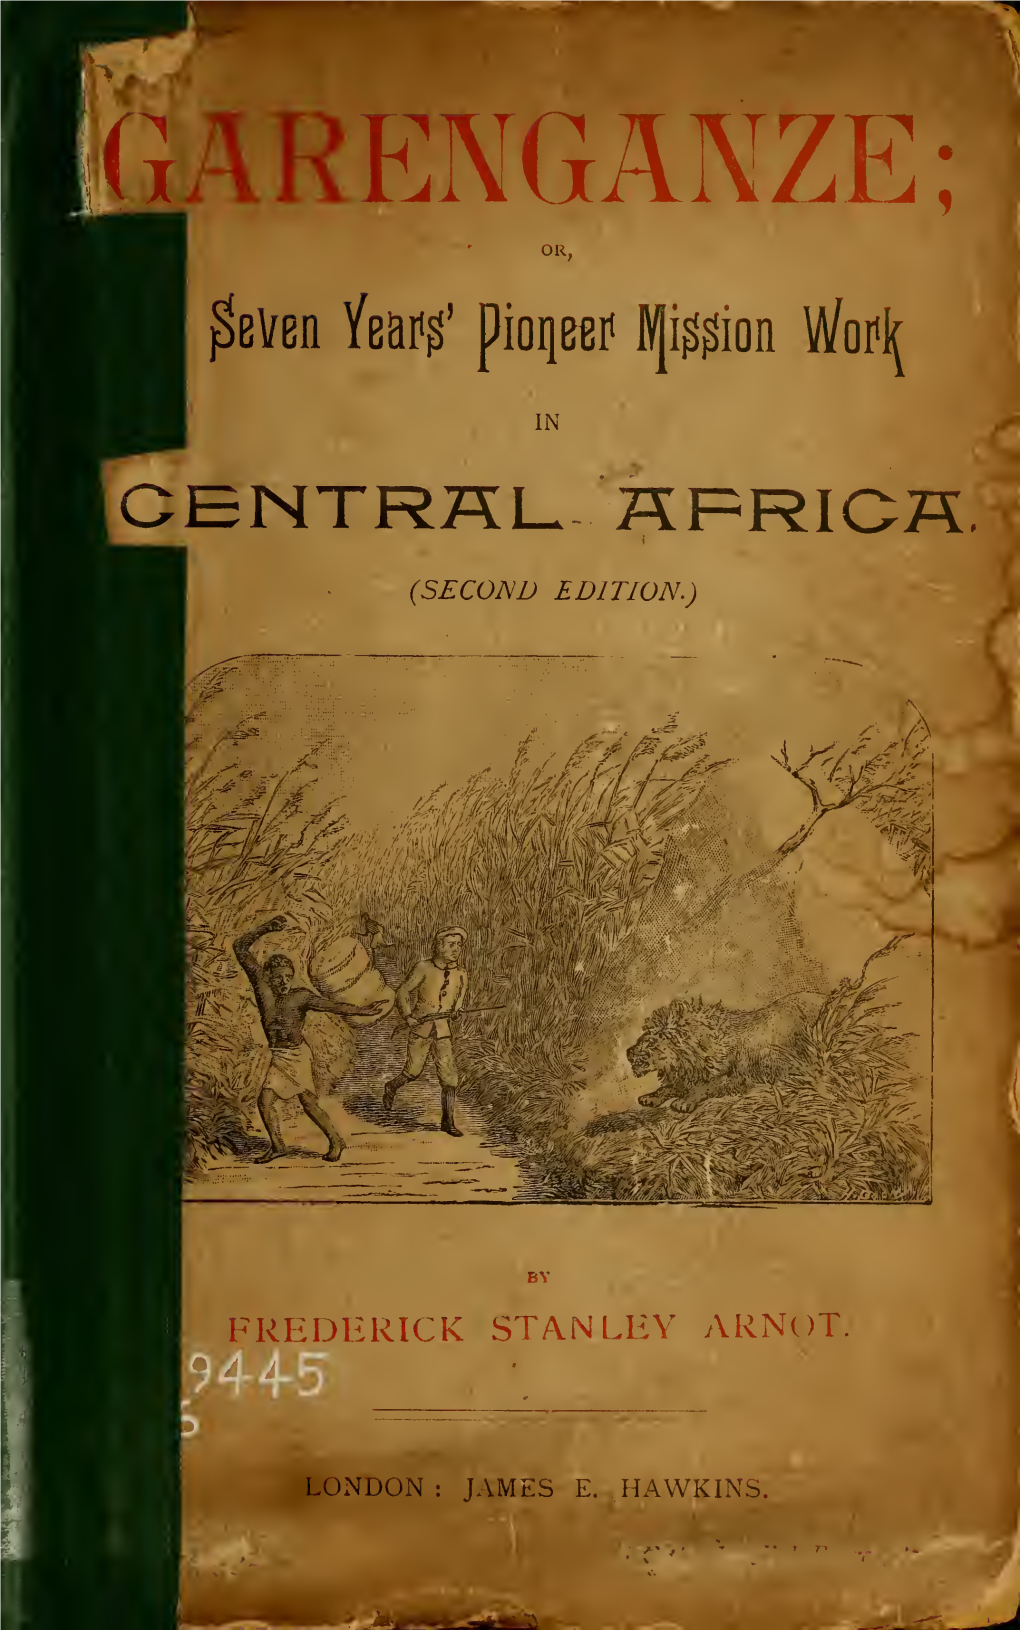 Garenganze : Or, Seven Years' Pioneer Mission Work in Central Africa